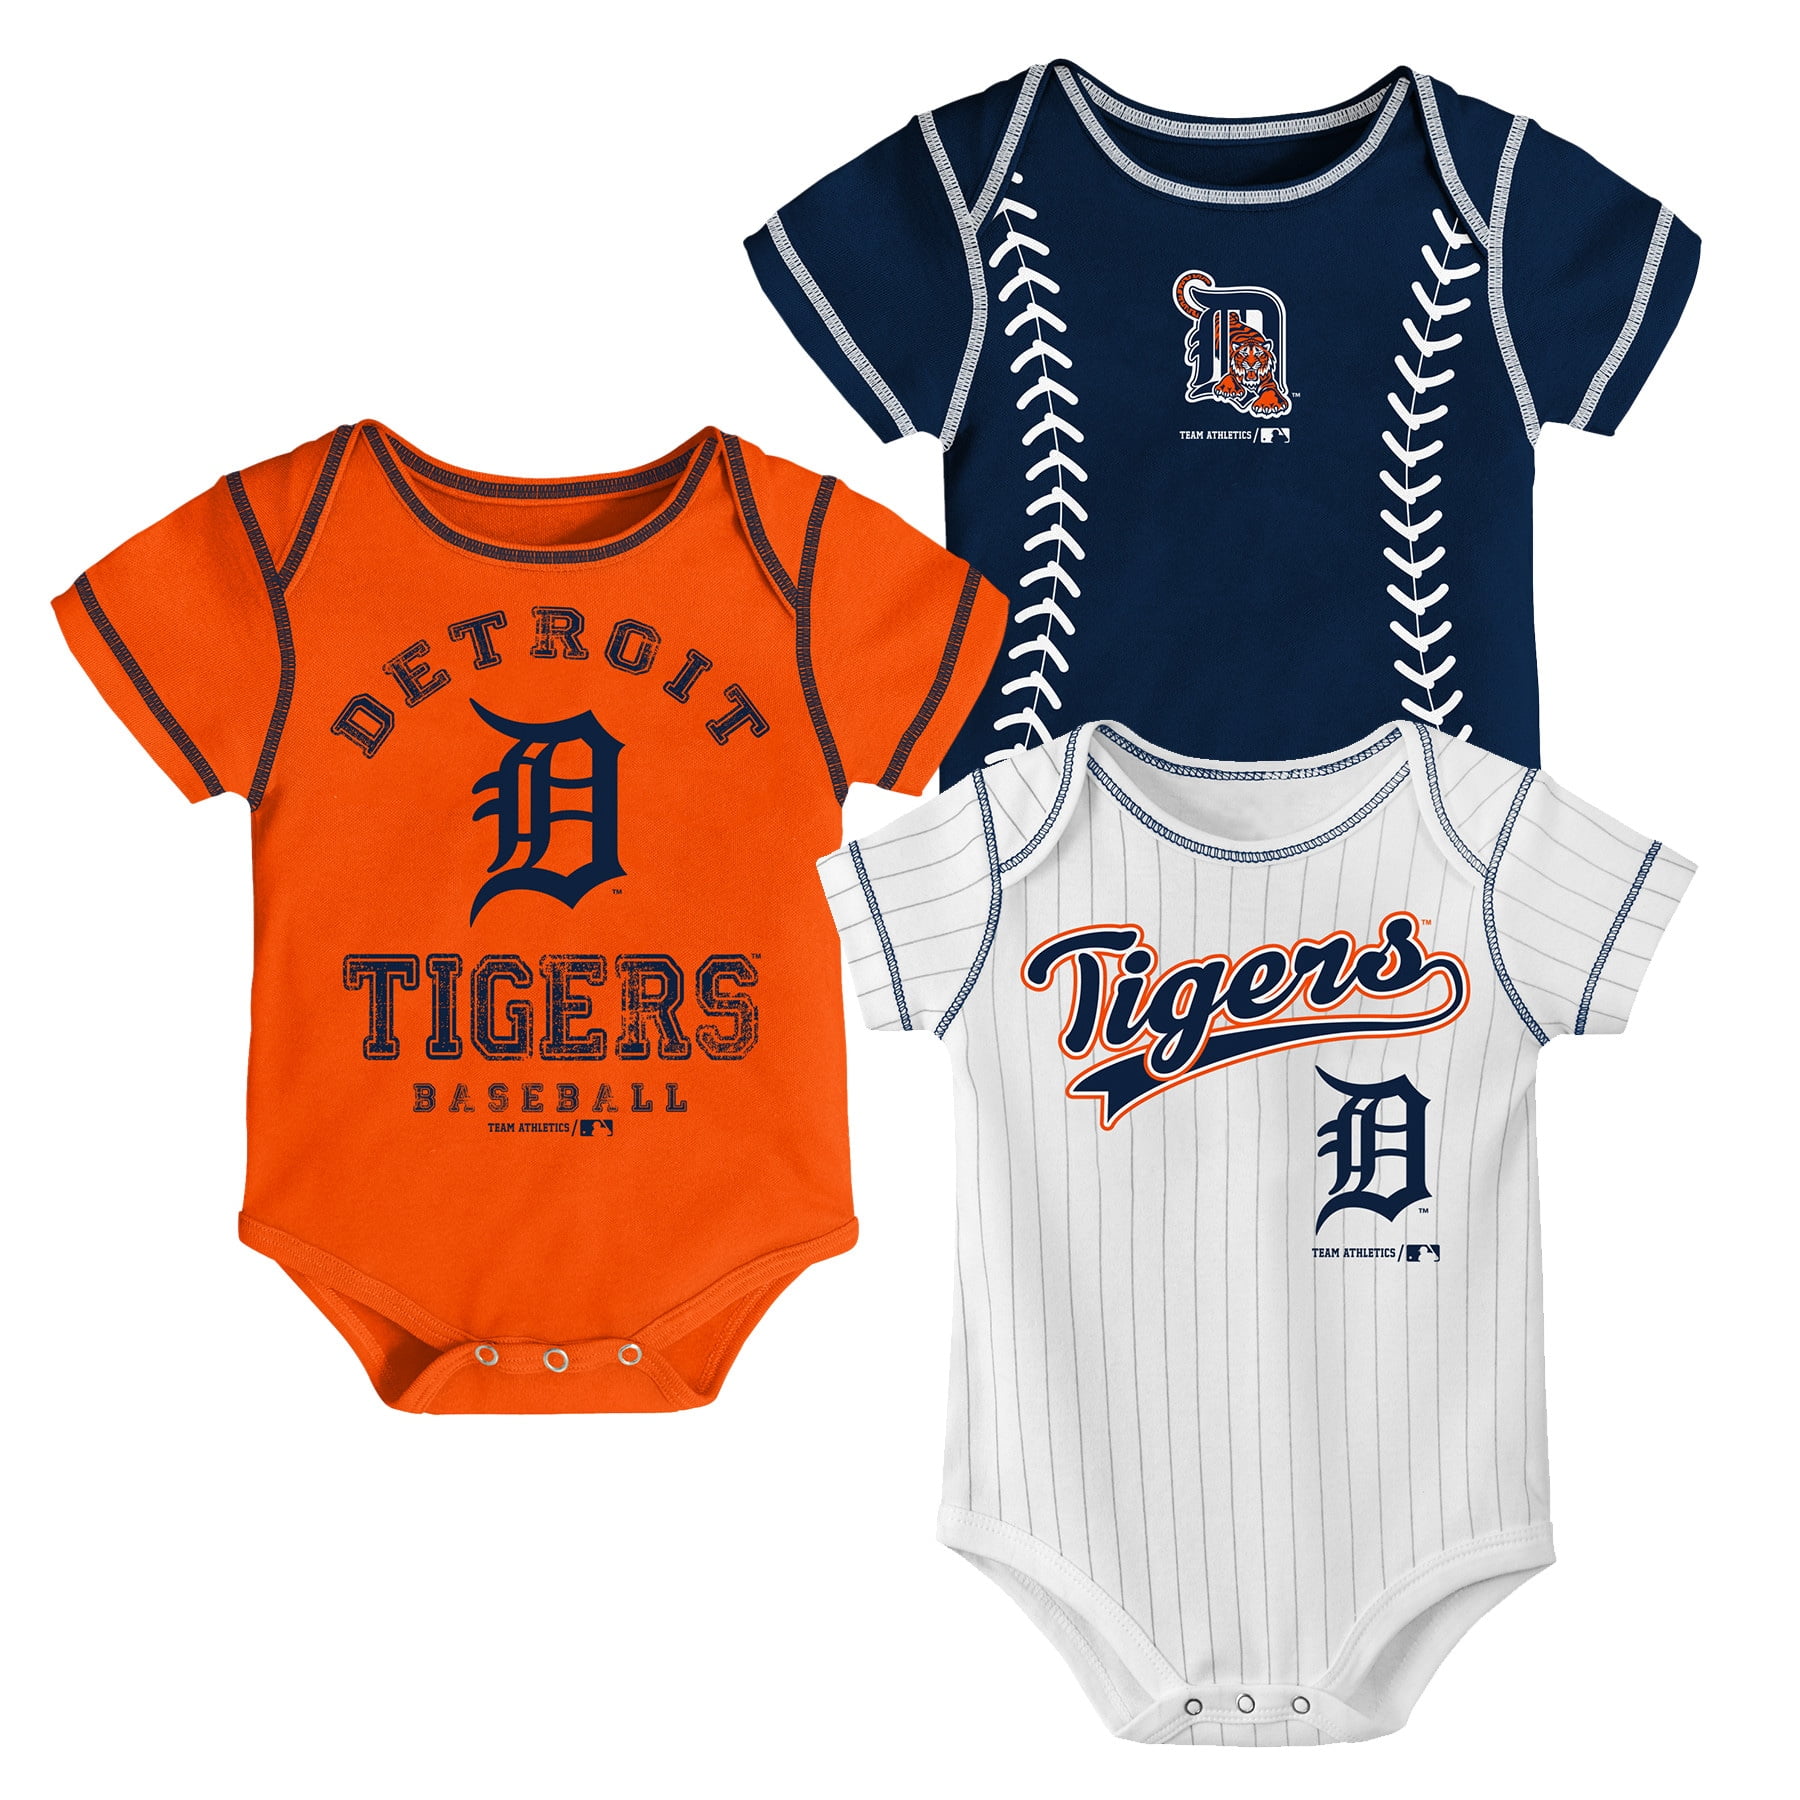 3 Pack NEW Baby Boy Detroit Tigers Bodysuits Creeper Set 0-3 months 